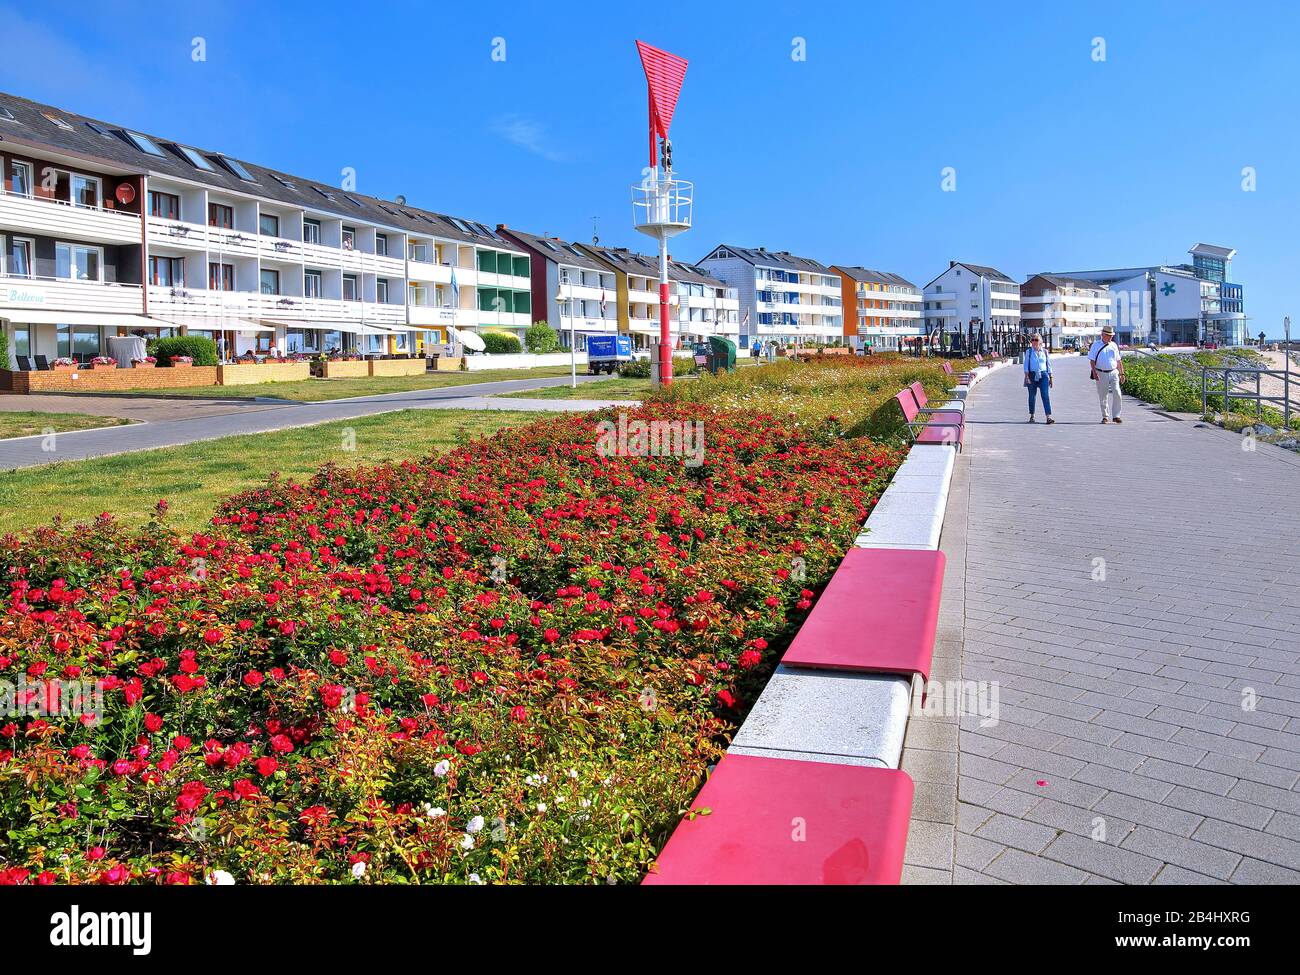 Promenade at the south beach with hotels and roses discounts, Heligoland, Heligoland bay, German bay, North Sea island, North Sea, Schleswig-Holstein, Germany Stock Photo